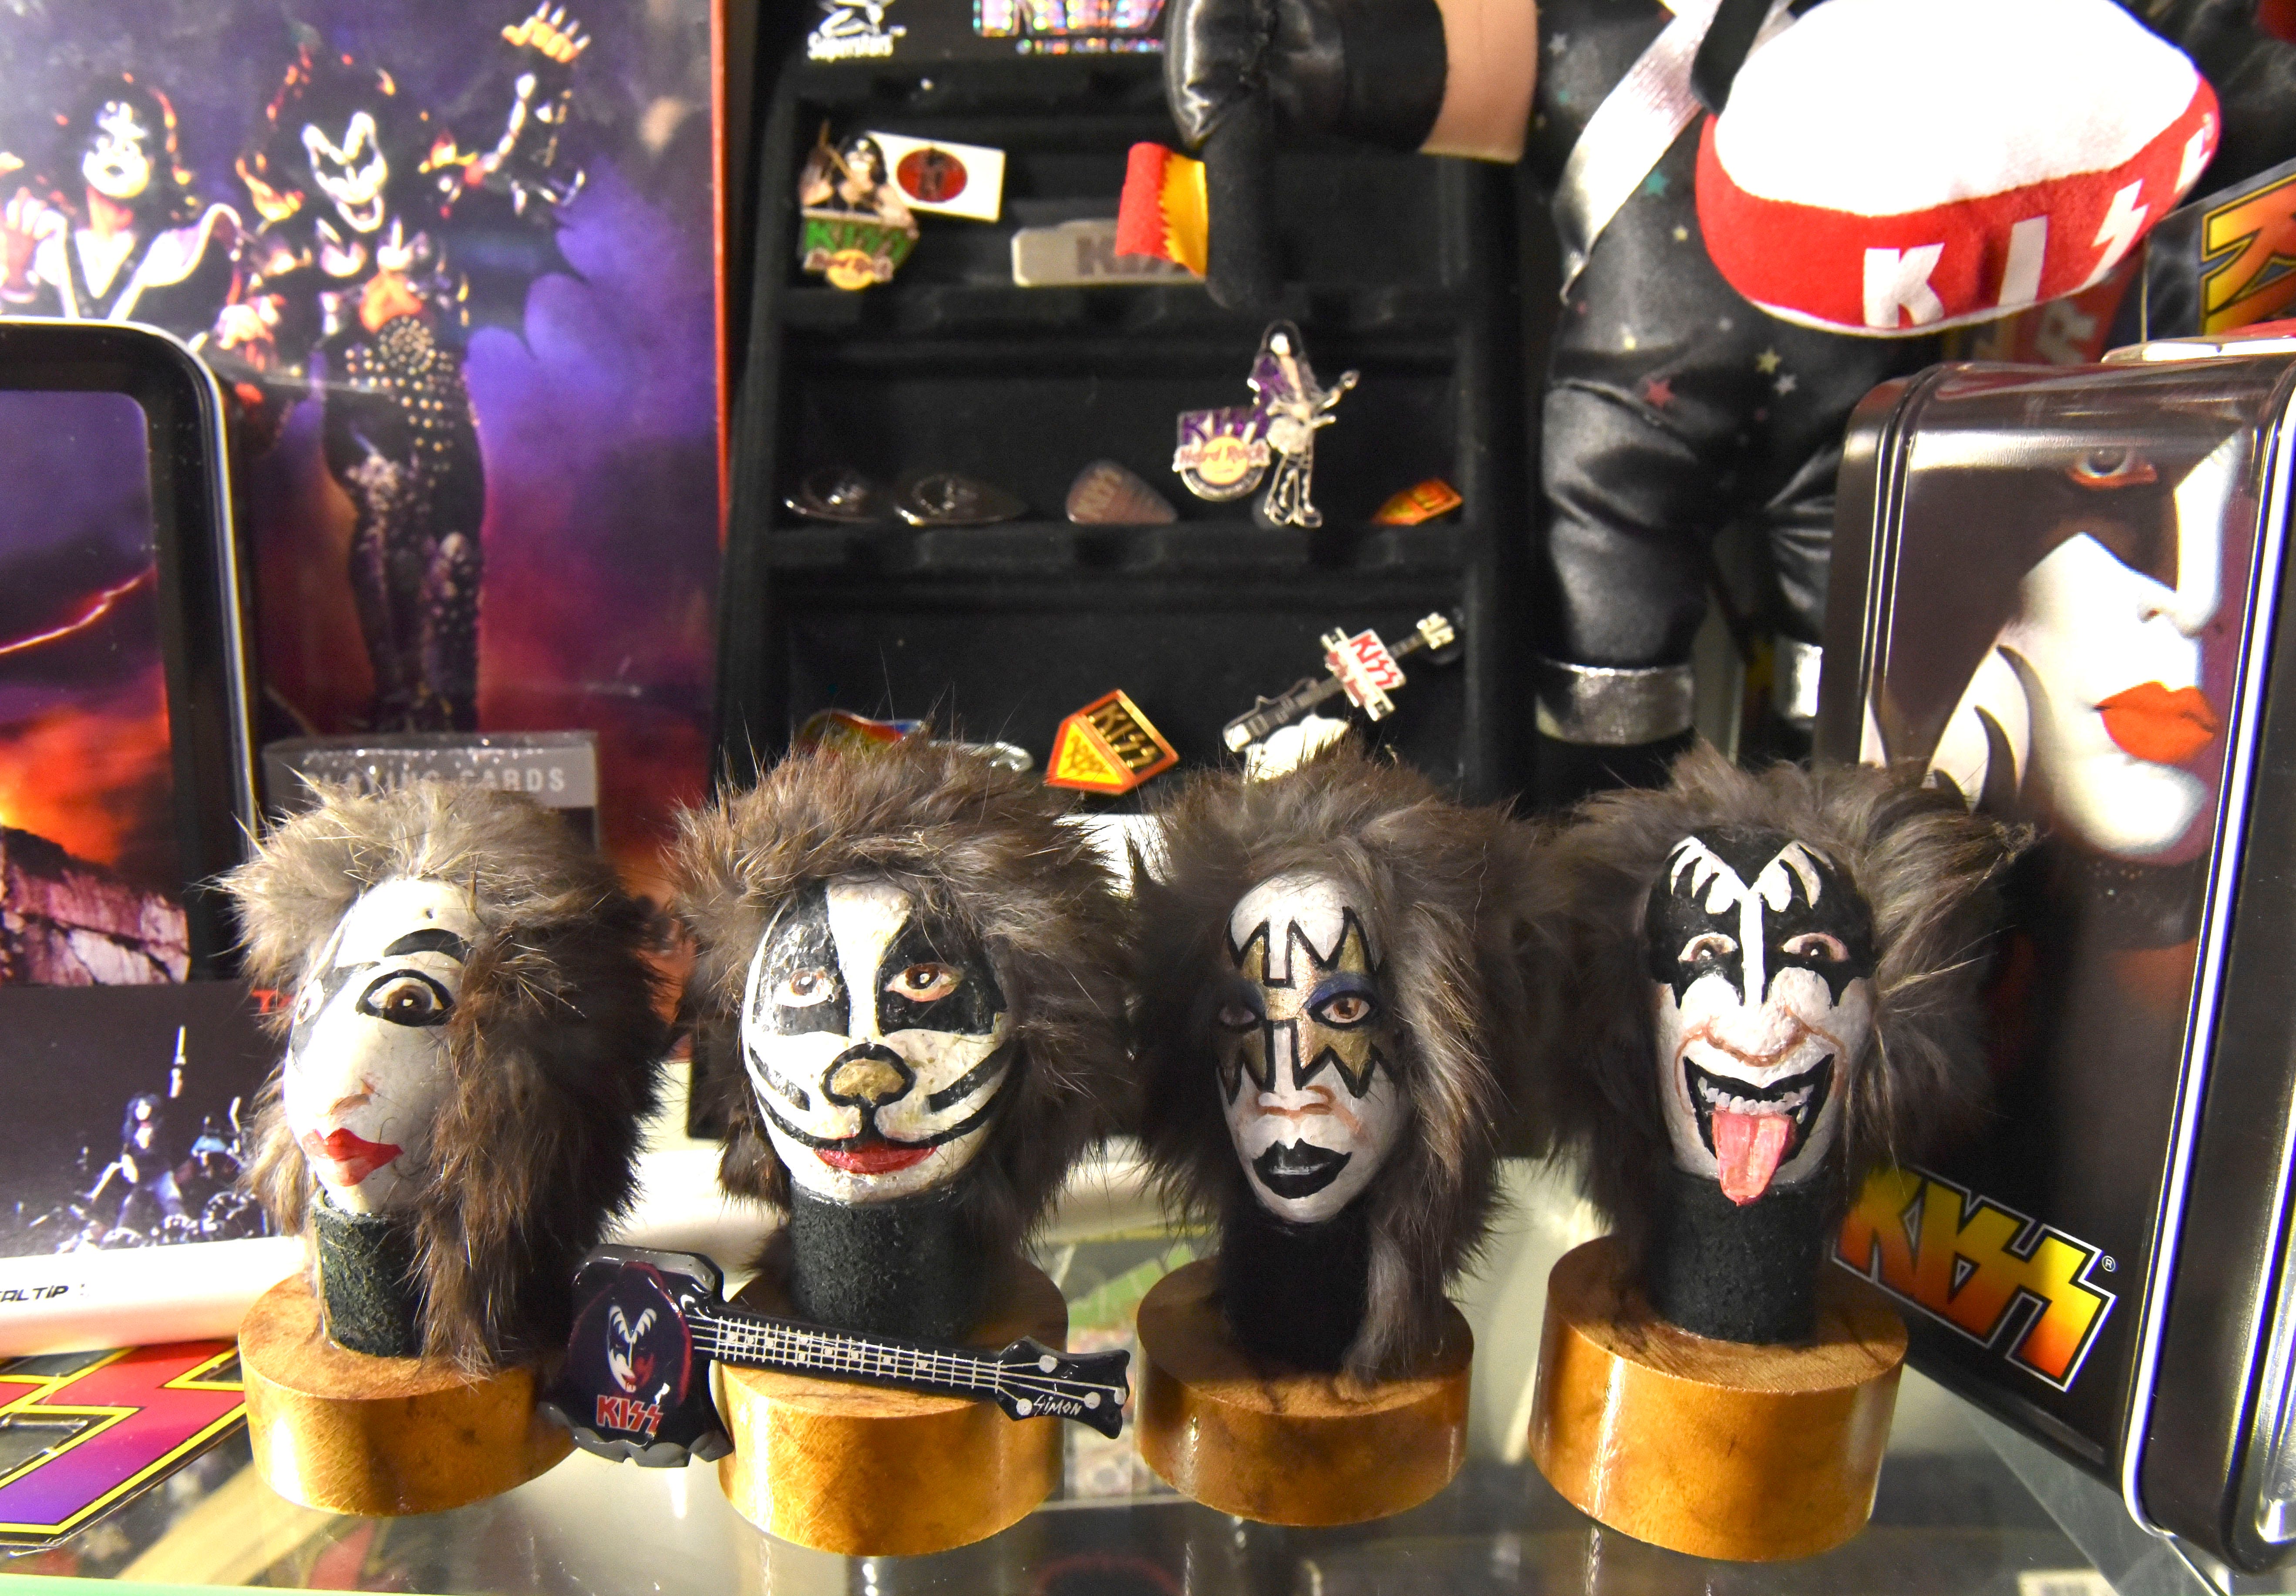 This is one of Terry's most prized possessions: rocks with the band members faces painted on them, which Terry bought from another Michigan KISS collector.